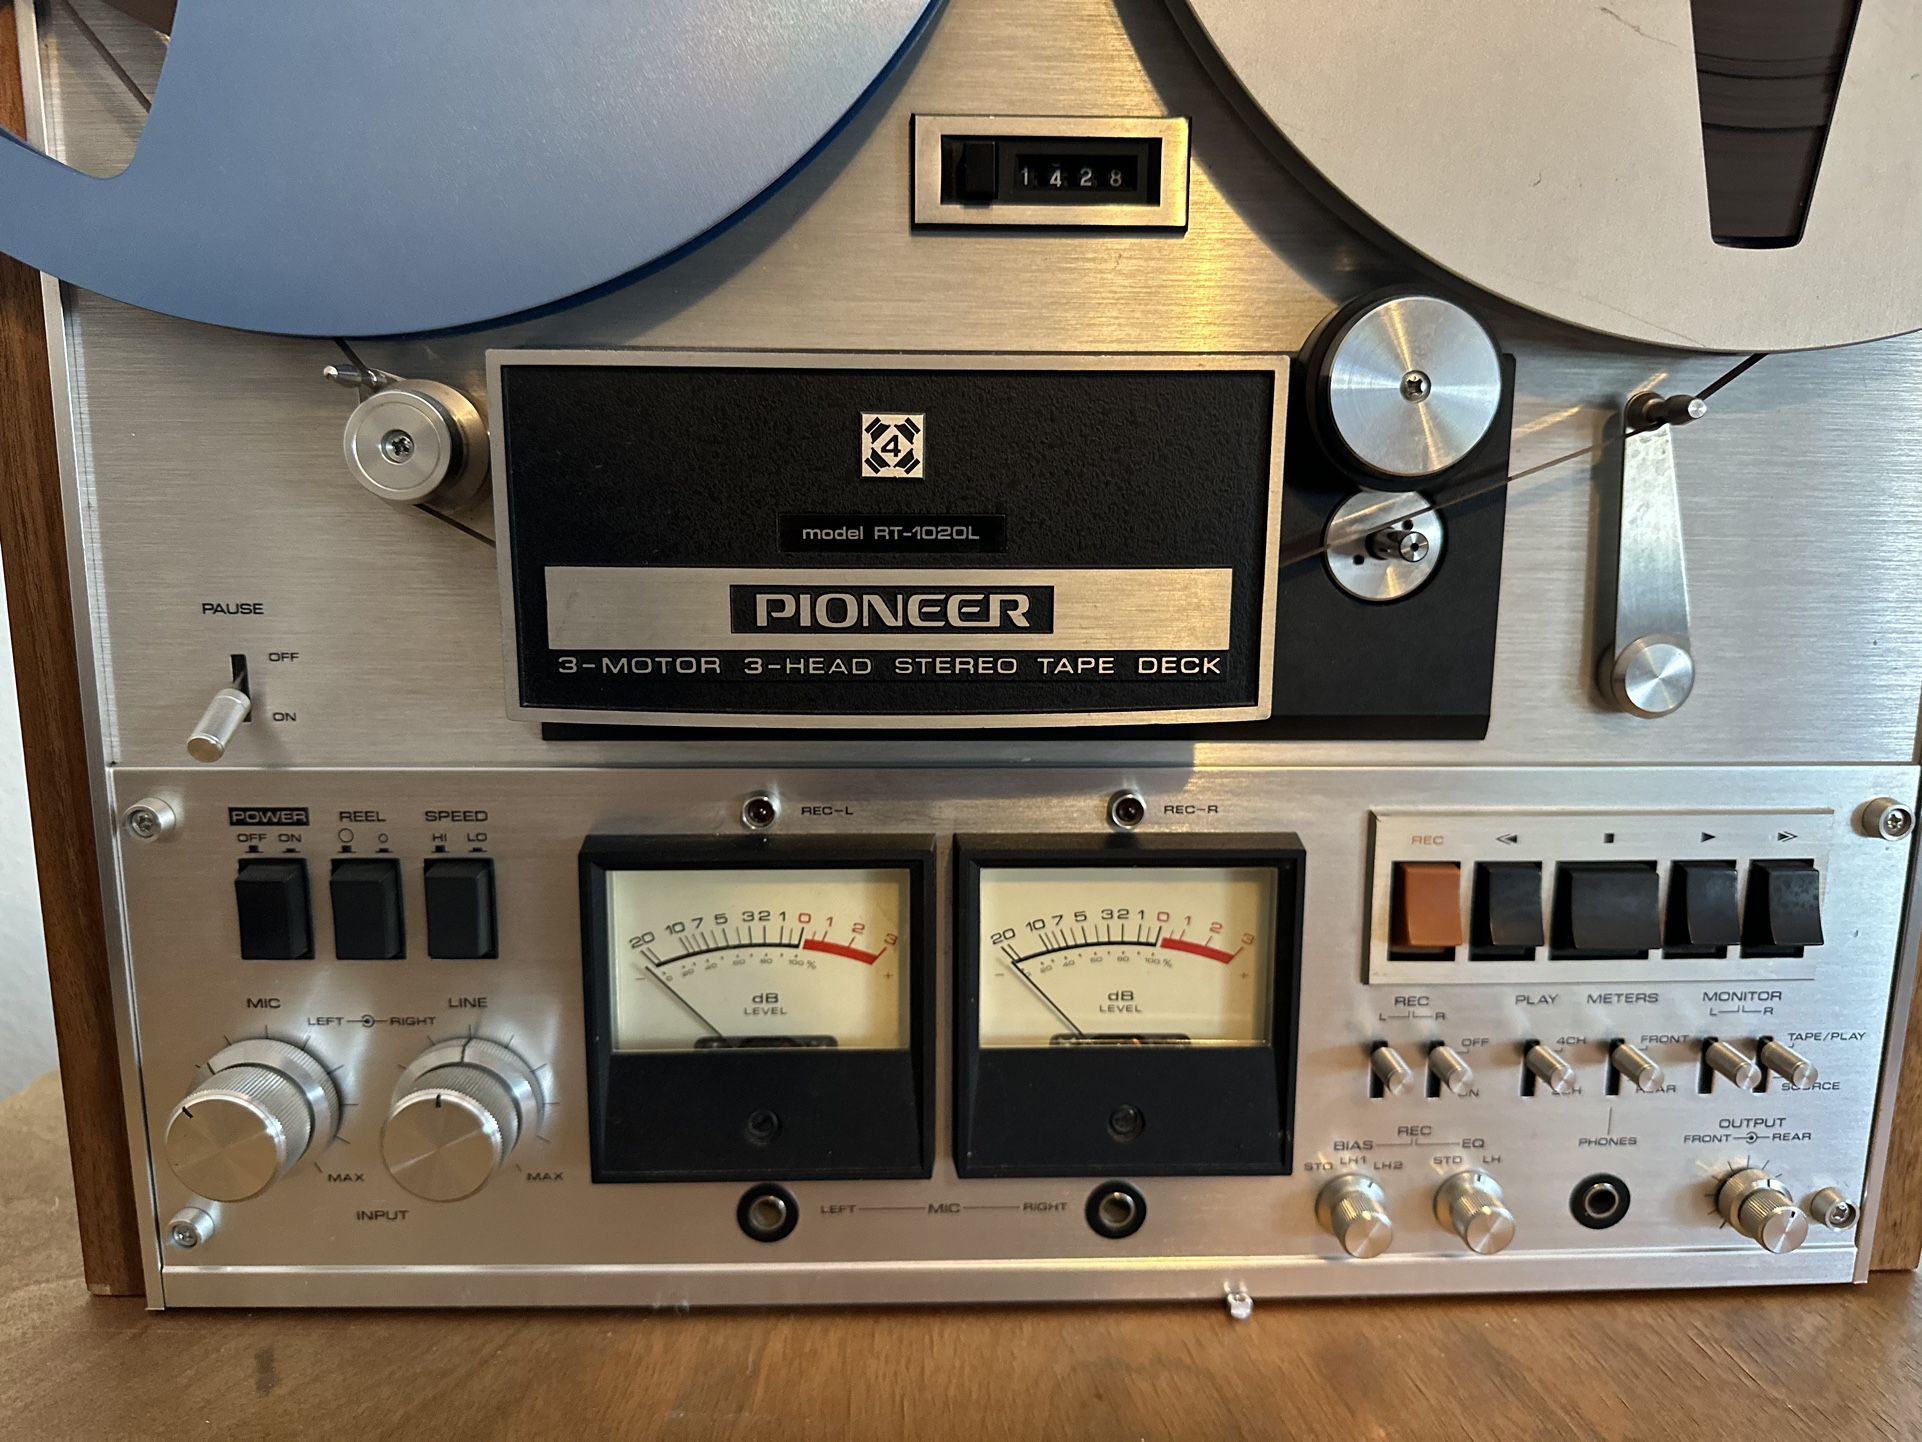 pioneer RT-1020L reel to reel serviced for Sale in Castaic, CA - OfferUp